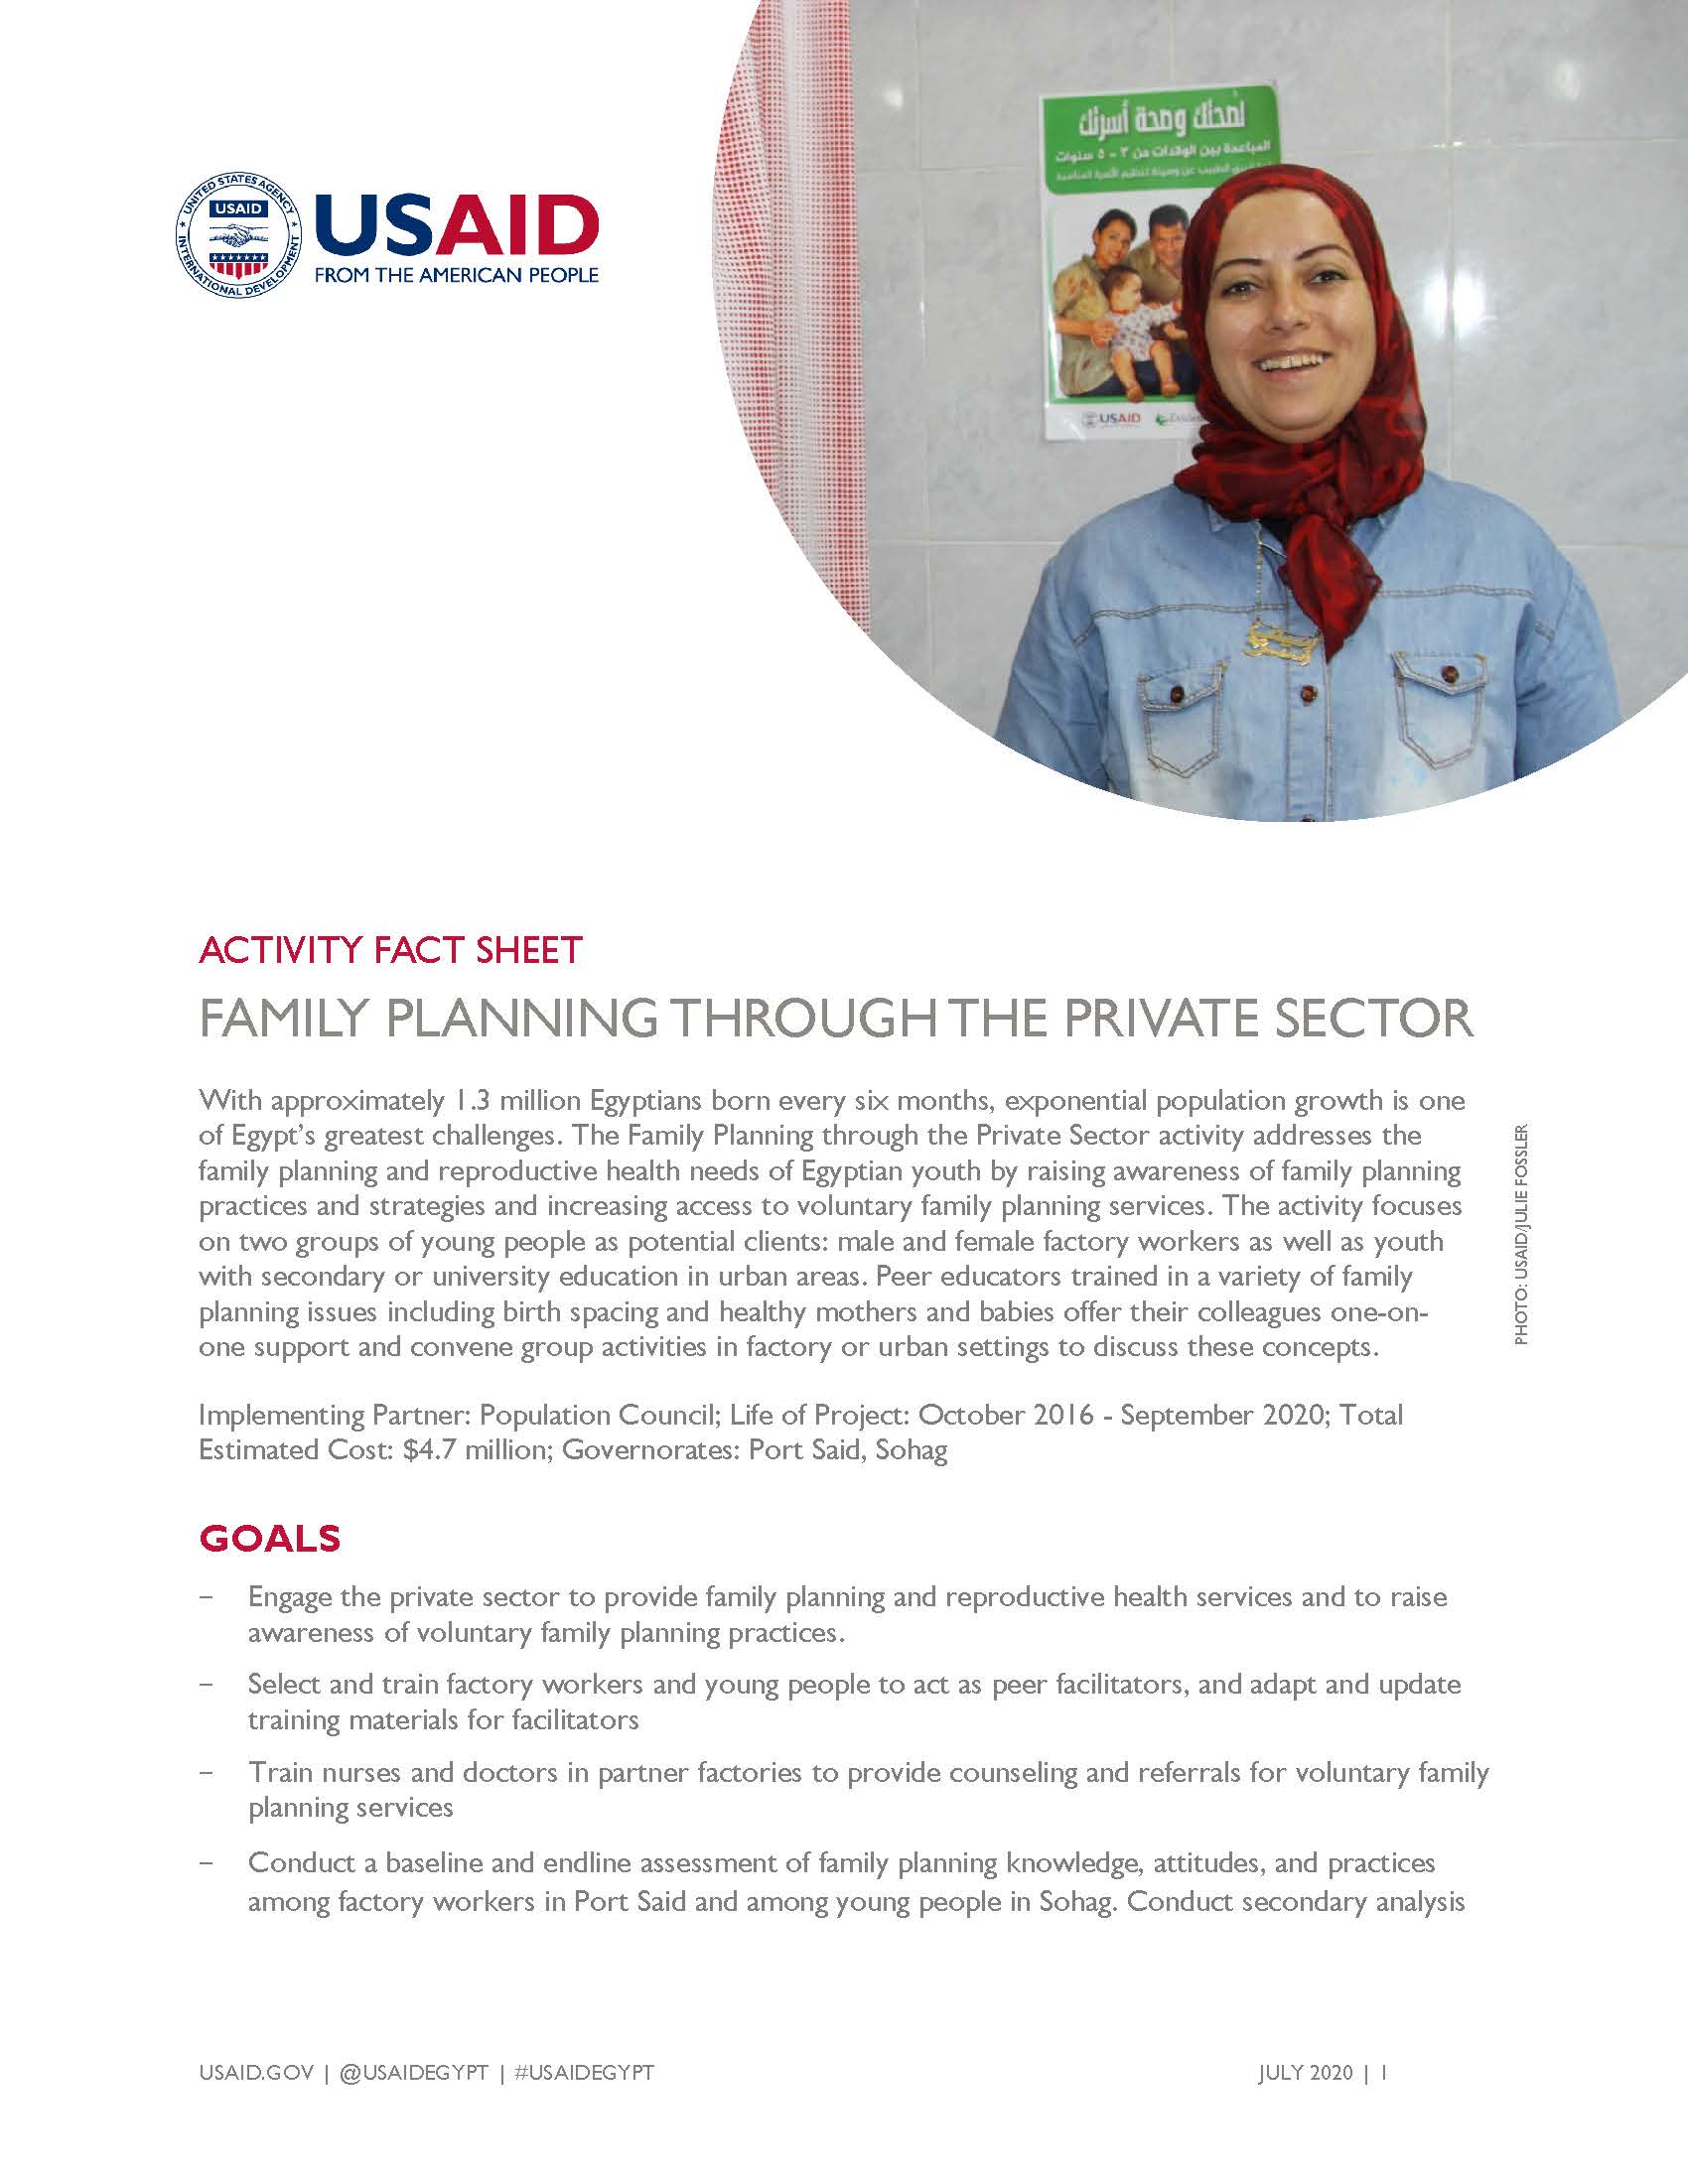 USAID/Egypt Activity Fact Sheet: Family Planning through the Private Sector